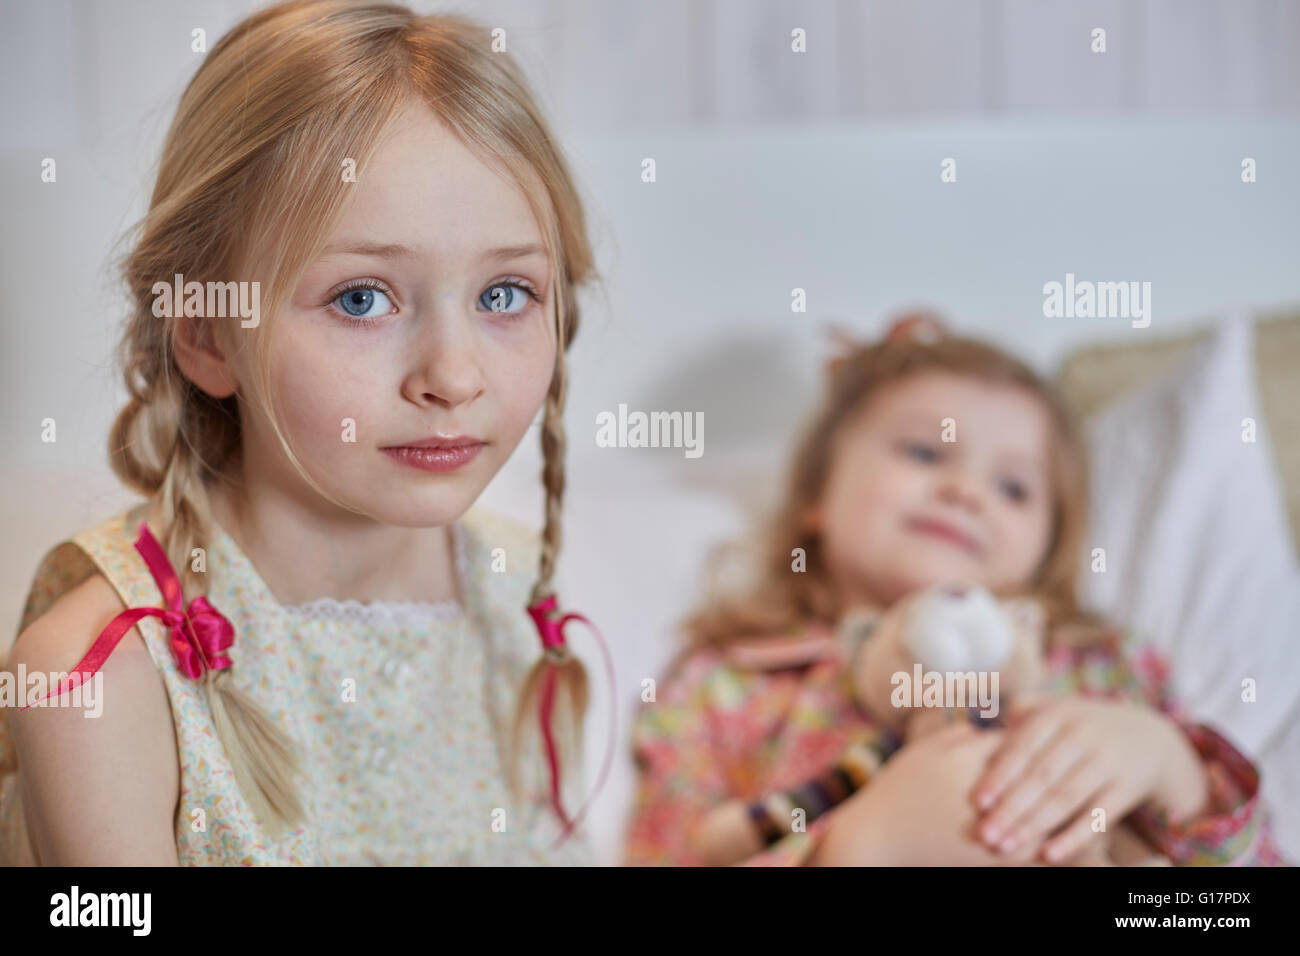 Girl with braided hair, sister hugging teddy bear in background Stock Photo